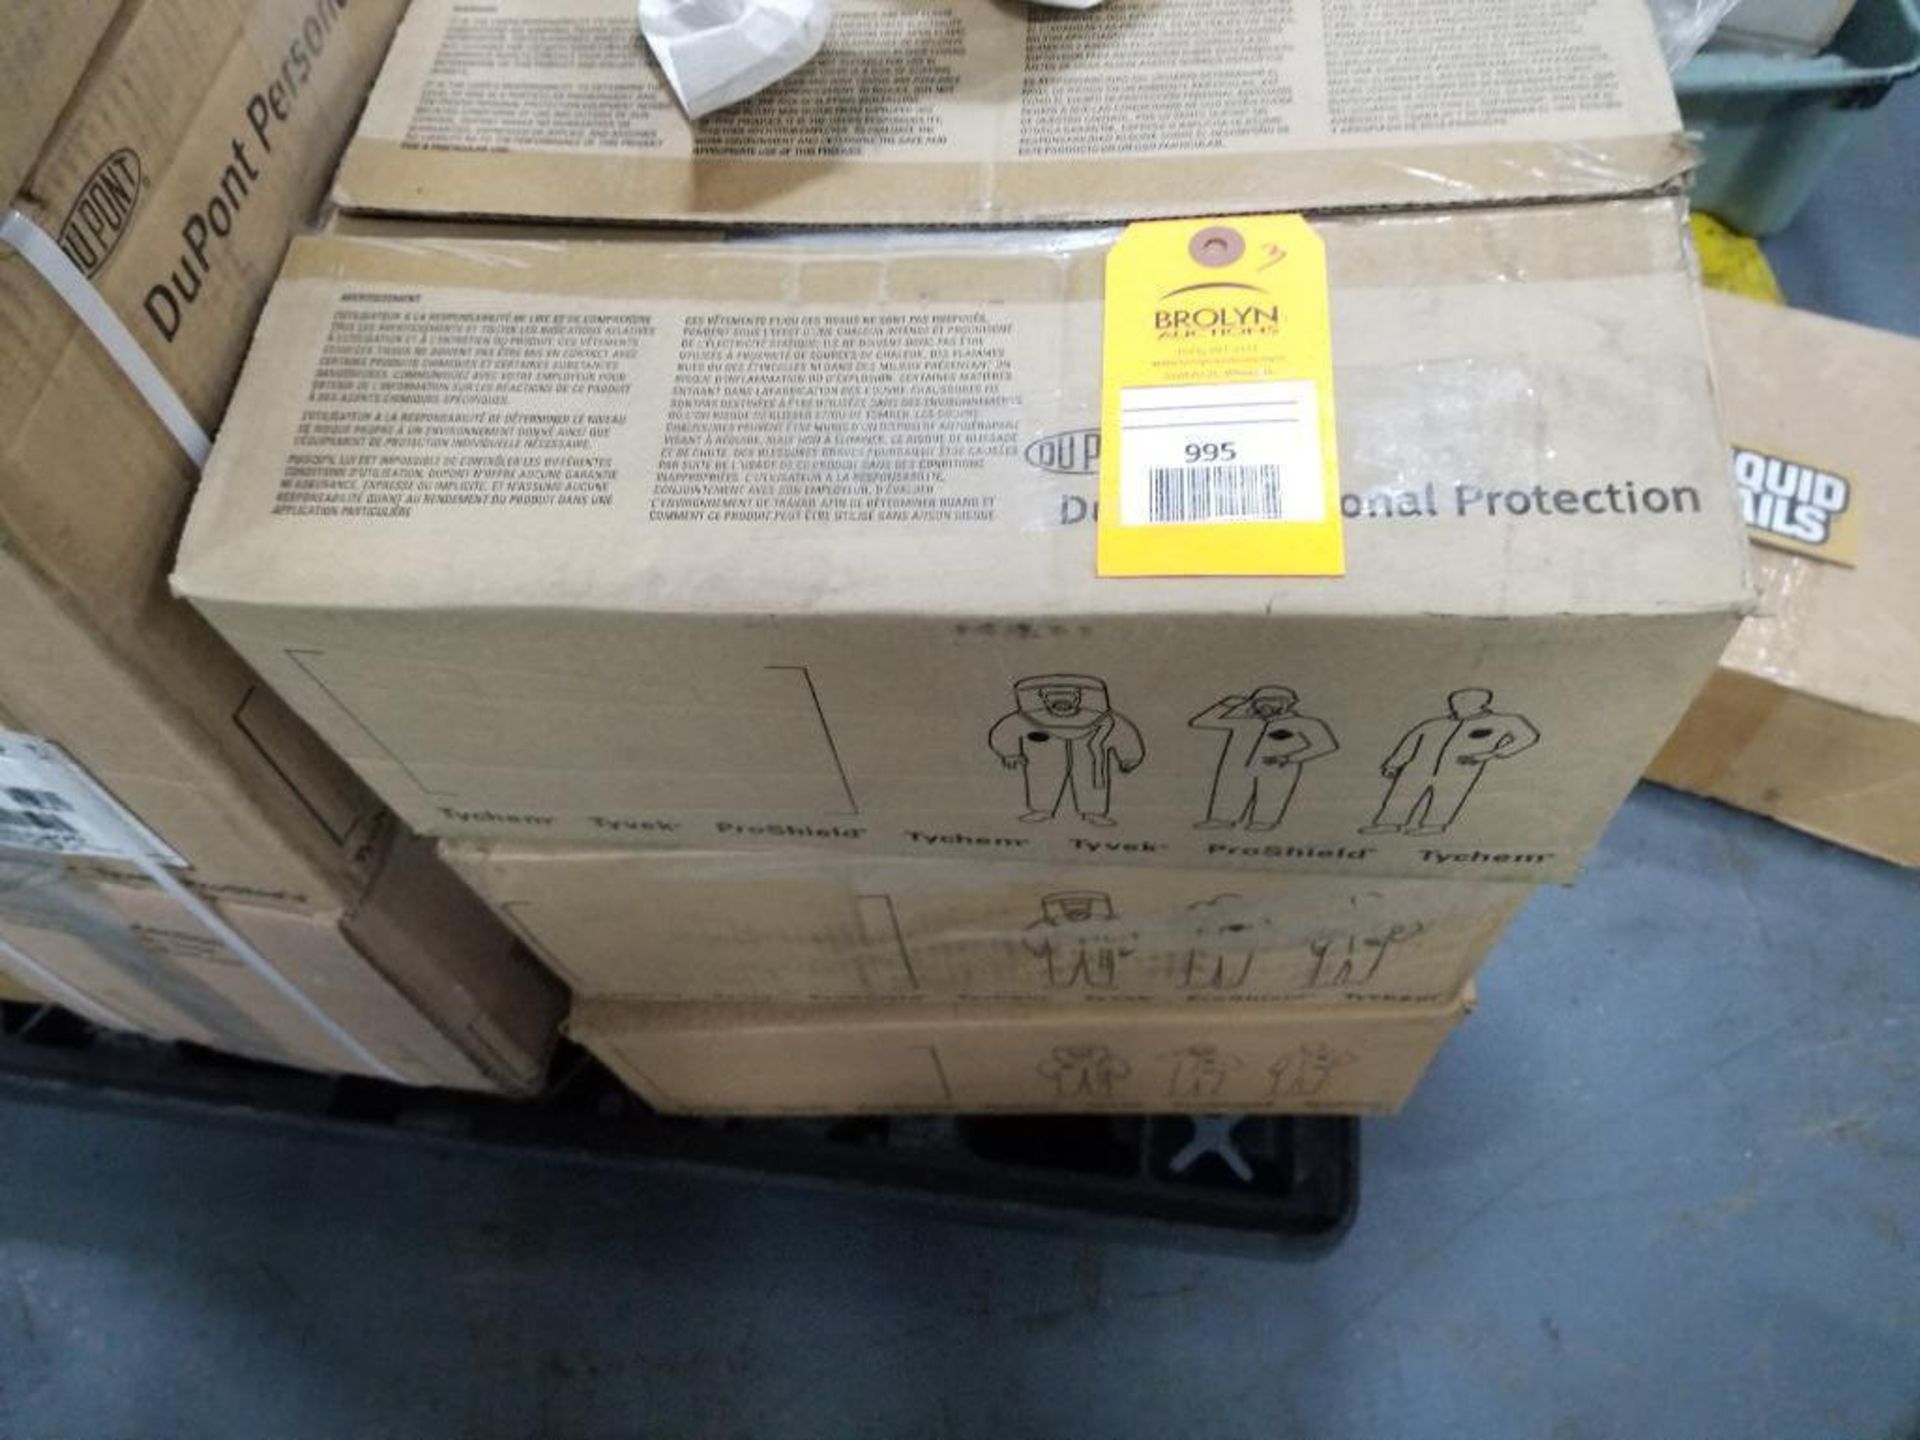 Qty 3 - Box of DuPont personal protection suits.